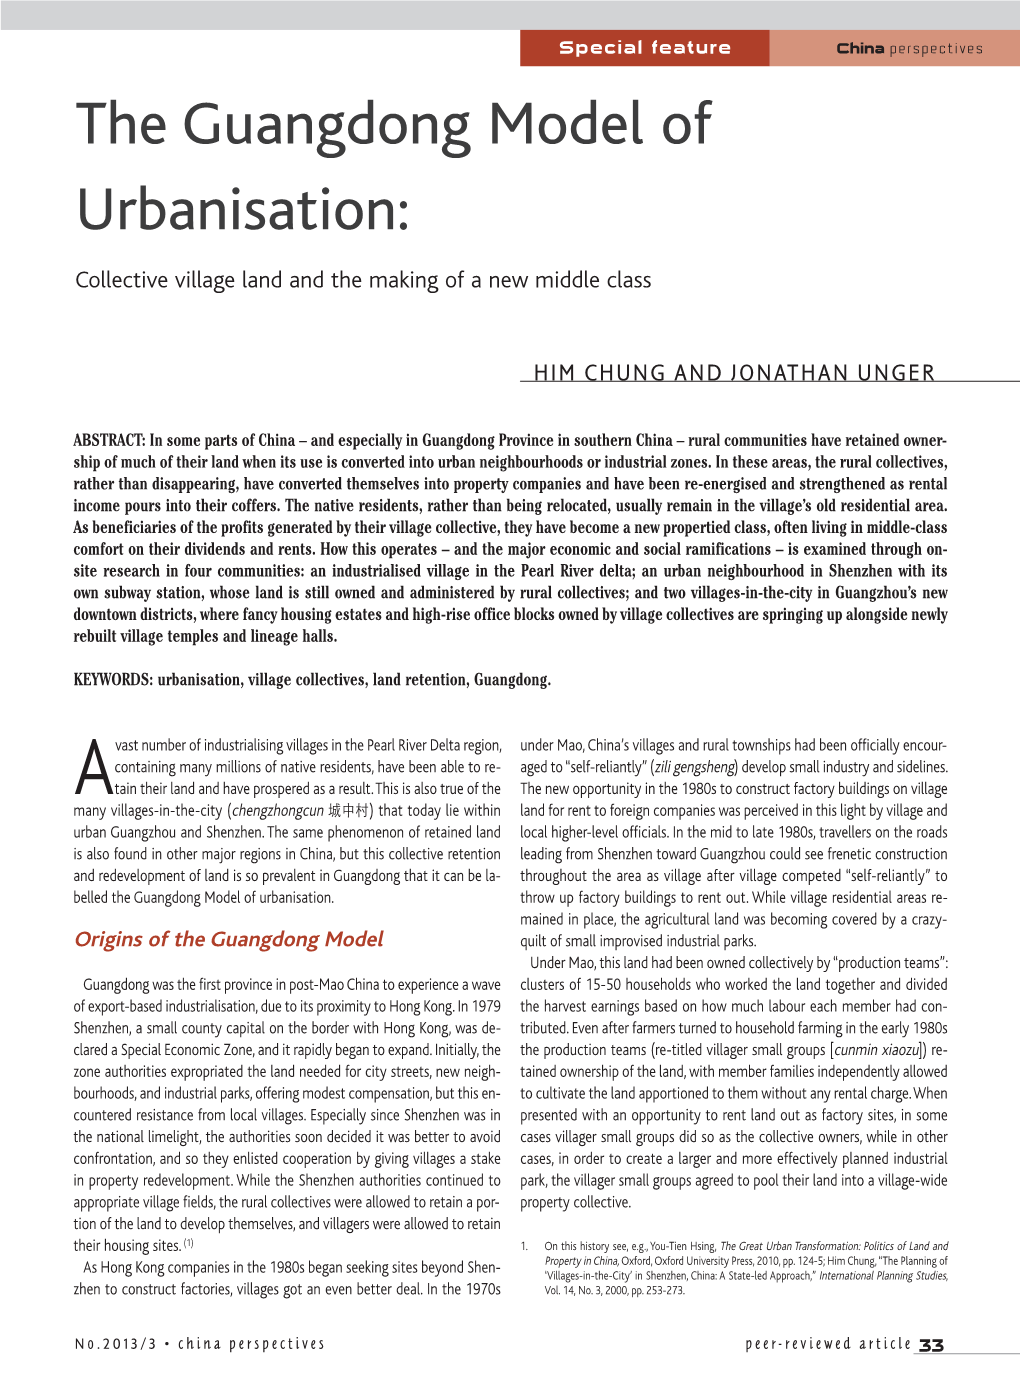 The Guangdong Model of Urbanisation